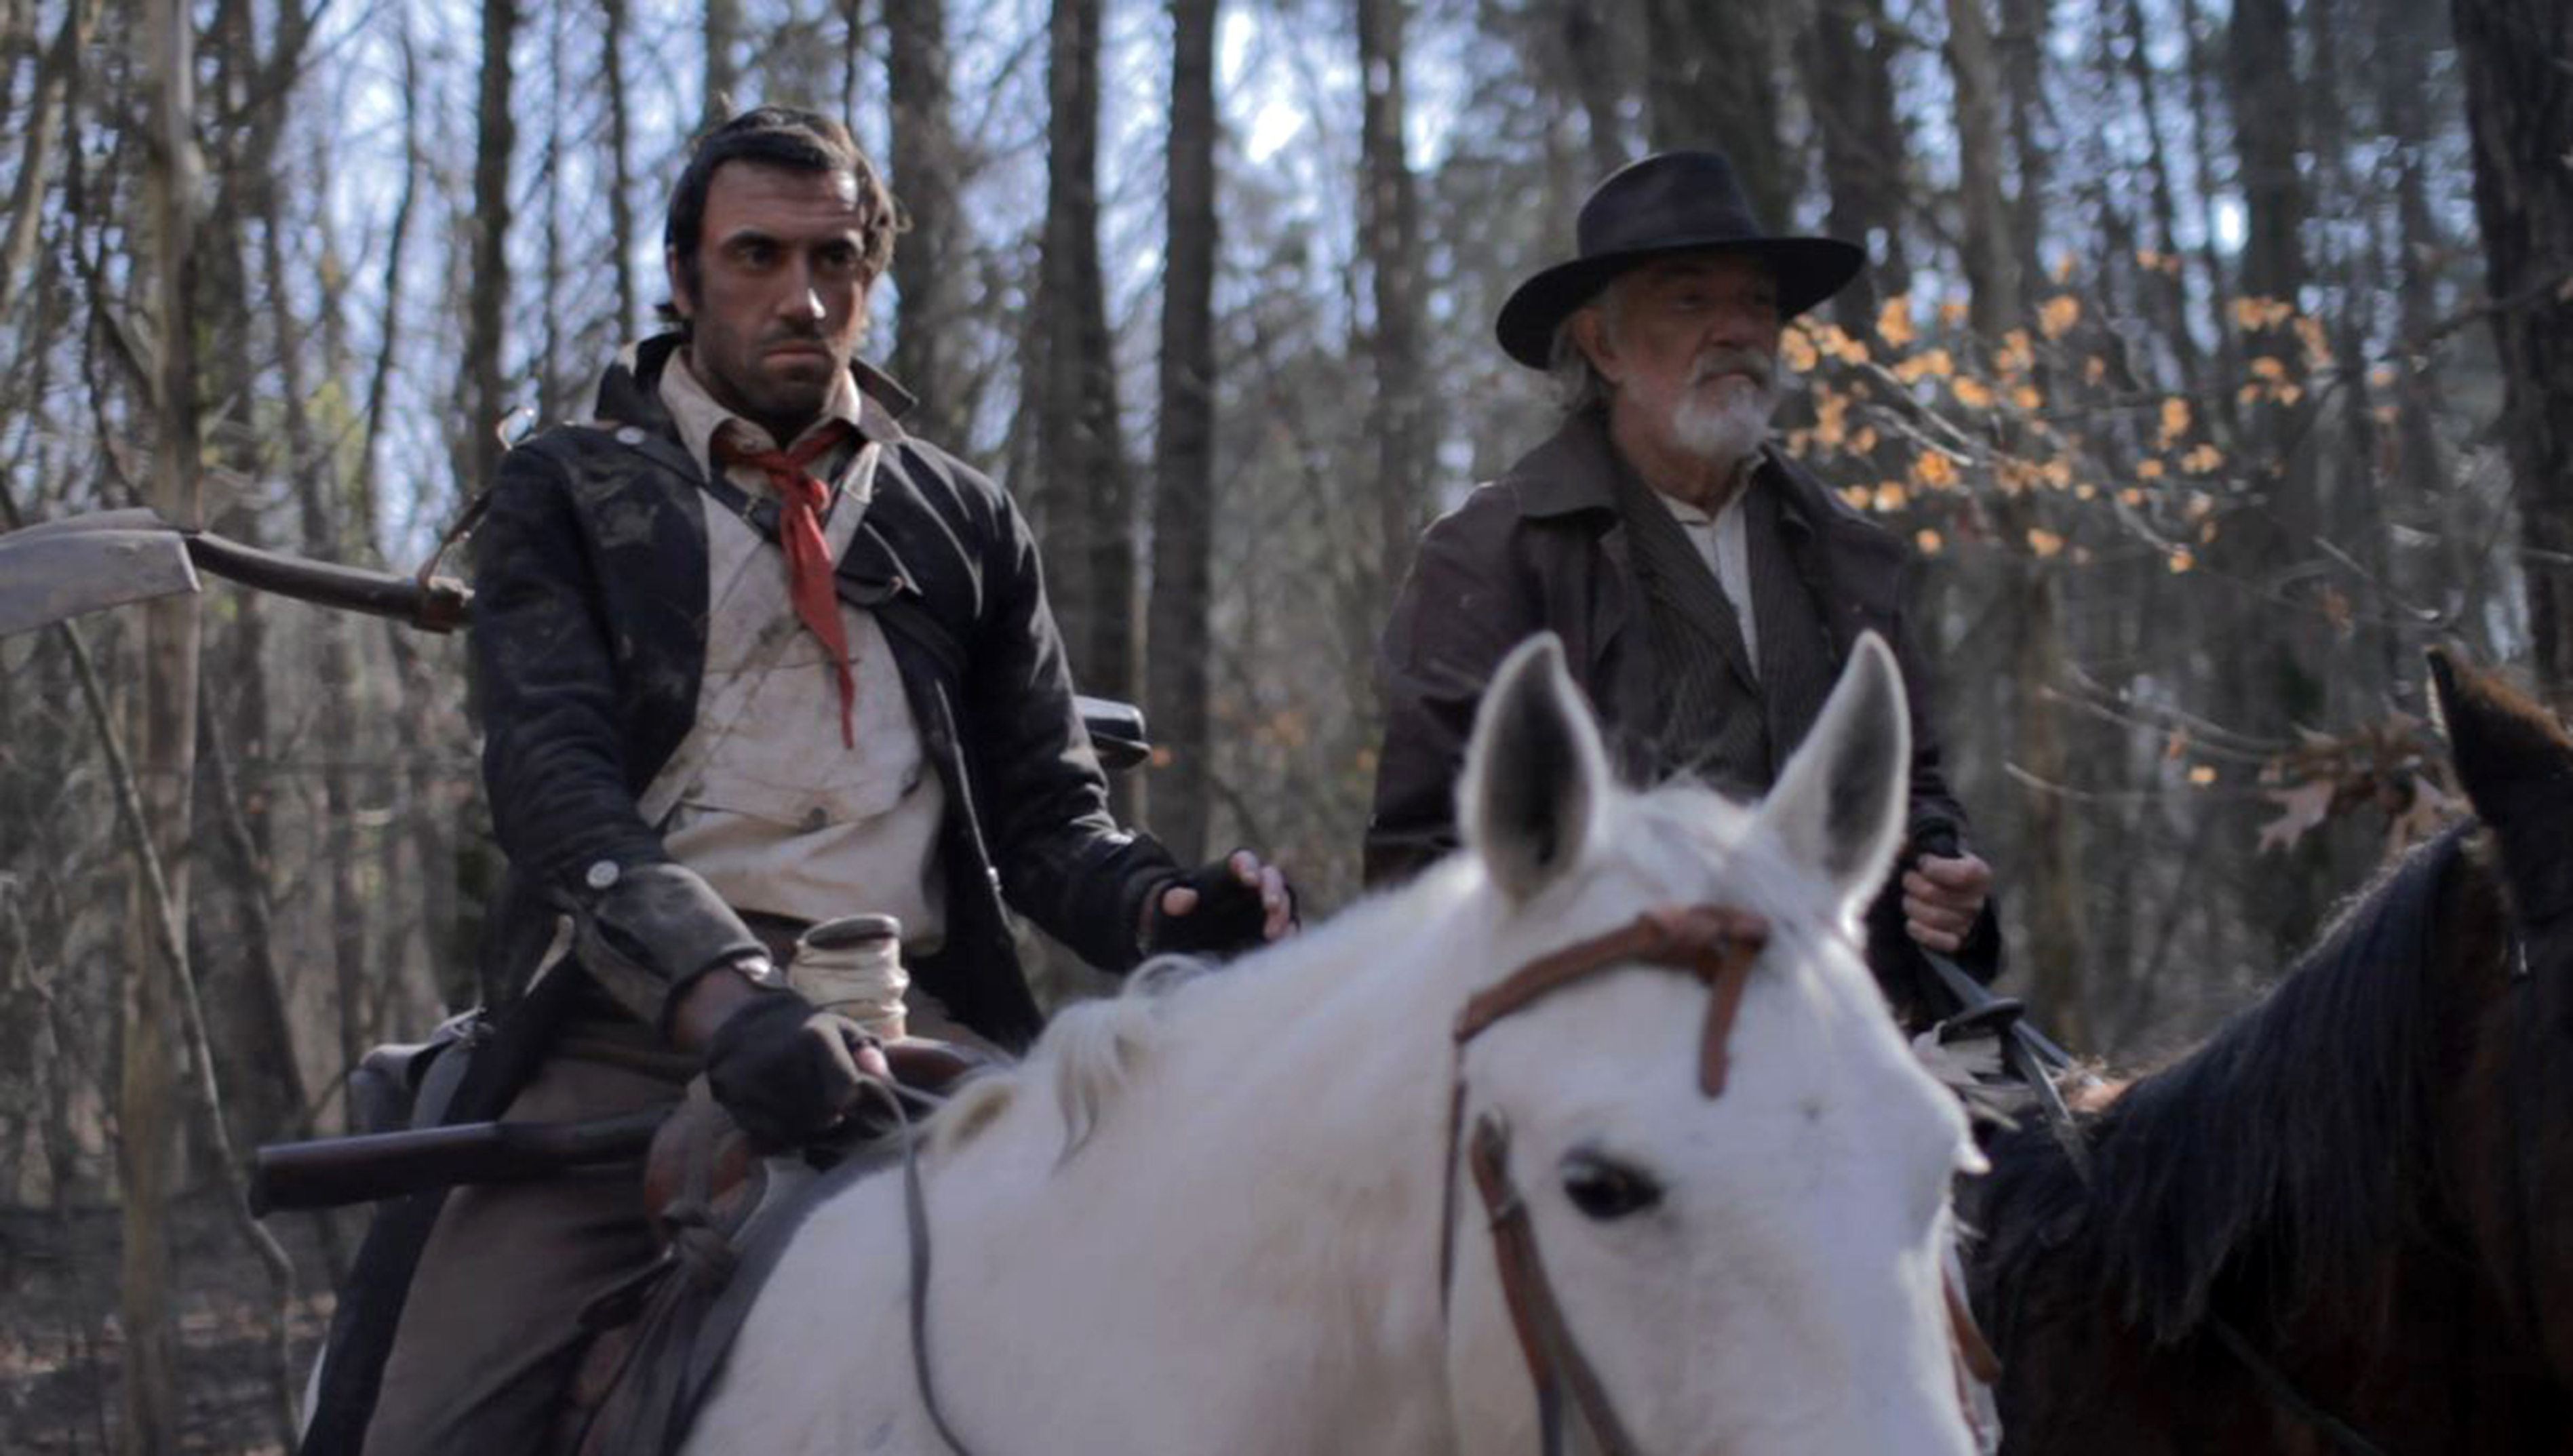 Daniel Van Thomas and Daniel Britt in Revelation Trail, from Entertainment One and Living End Productions (2014)